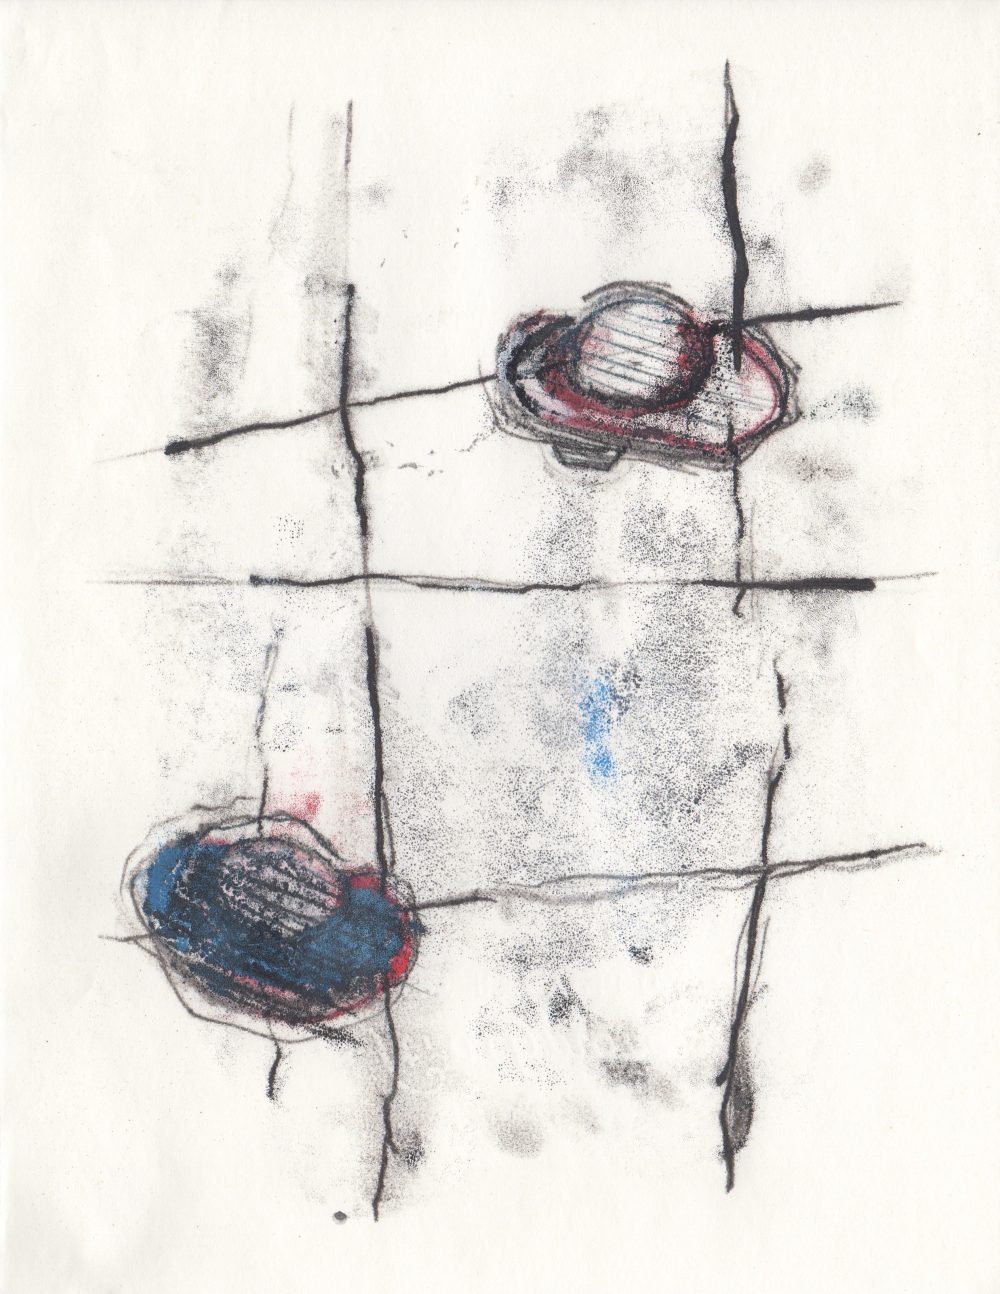 A gestural drawing depicts a black grid and two orblike shapes. One is in the lower left part of the grid and the other in the upper right.